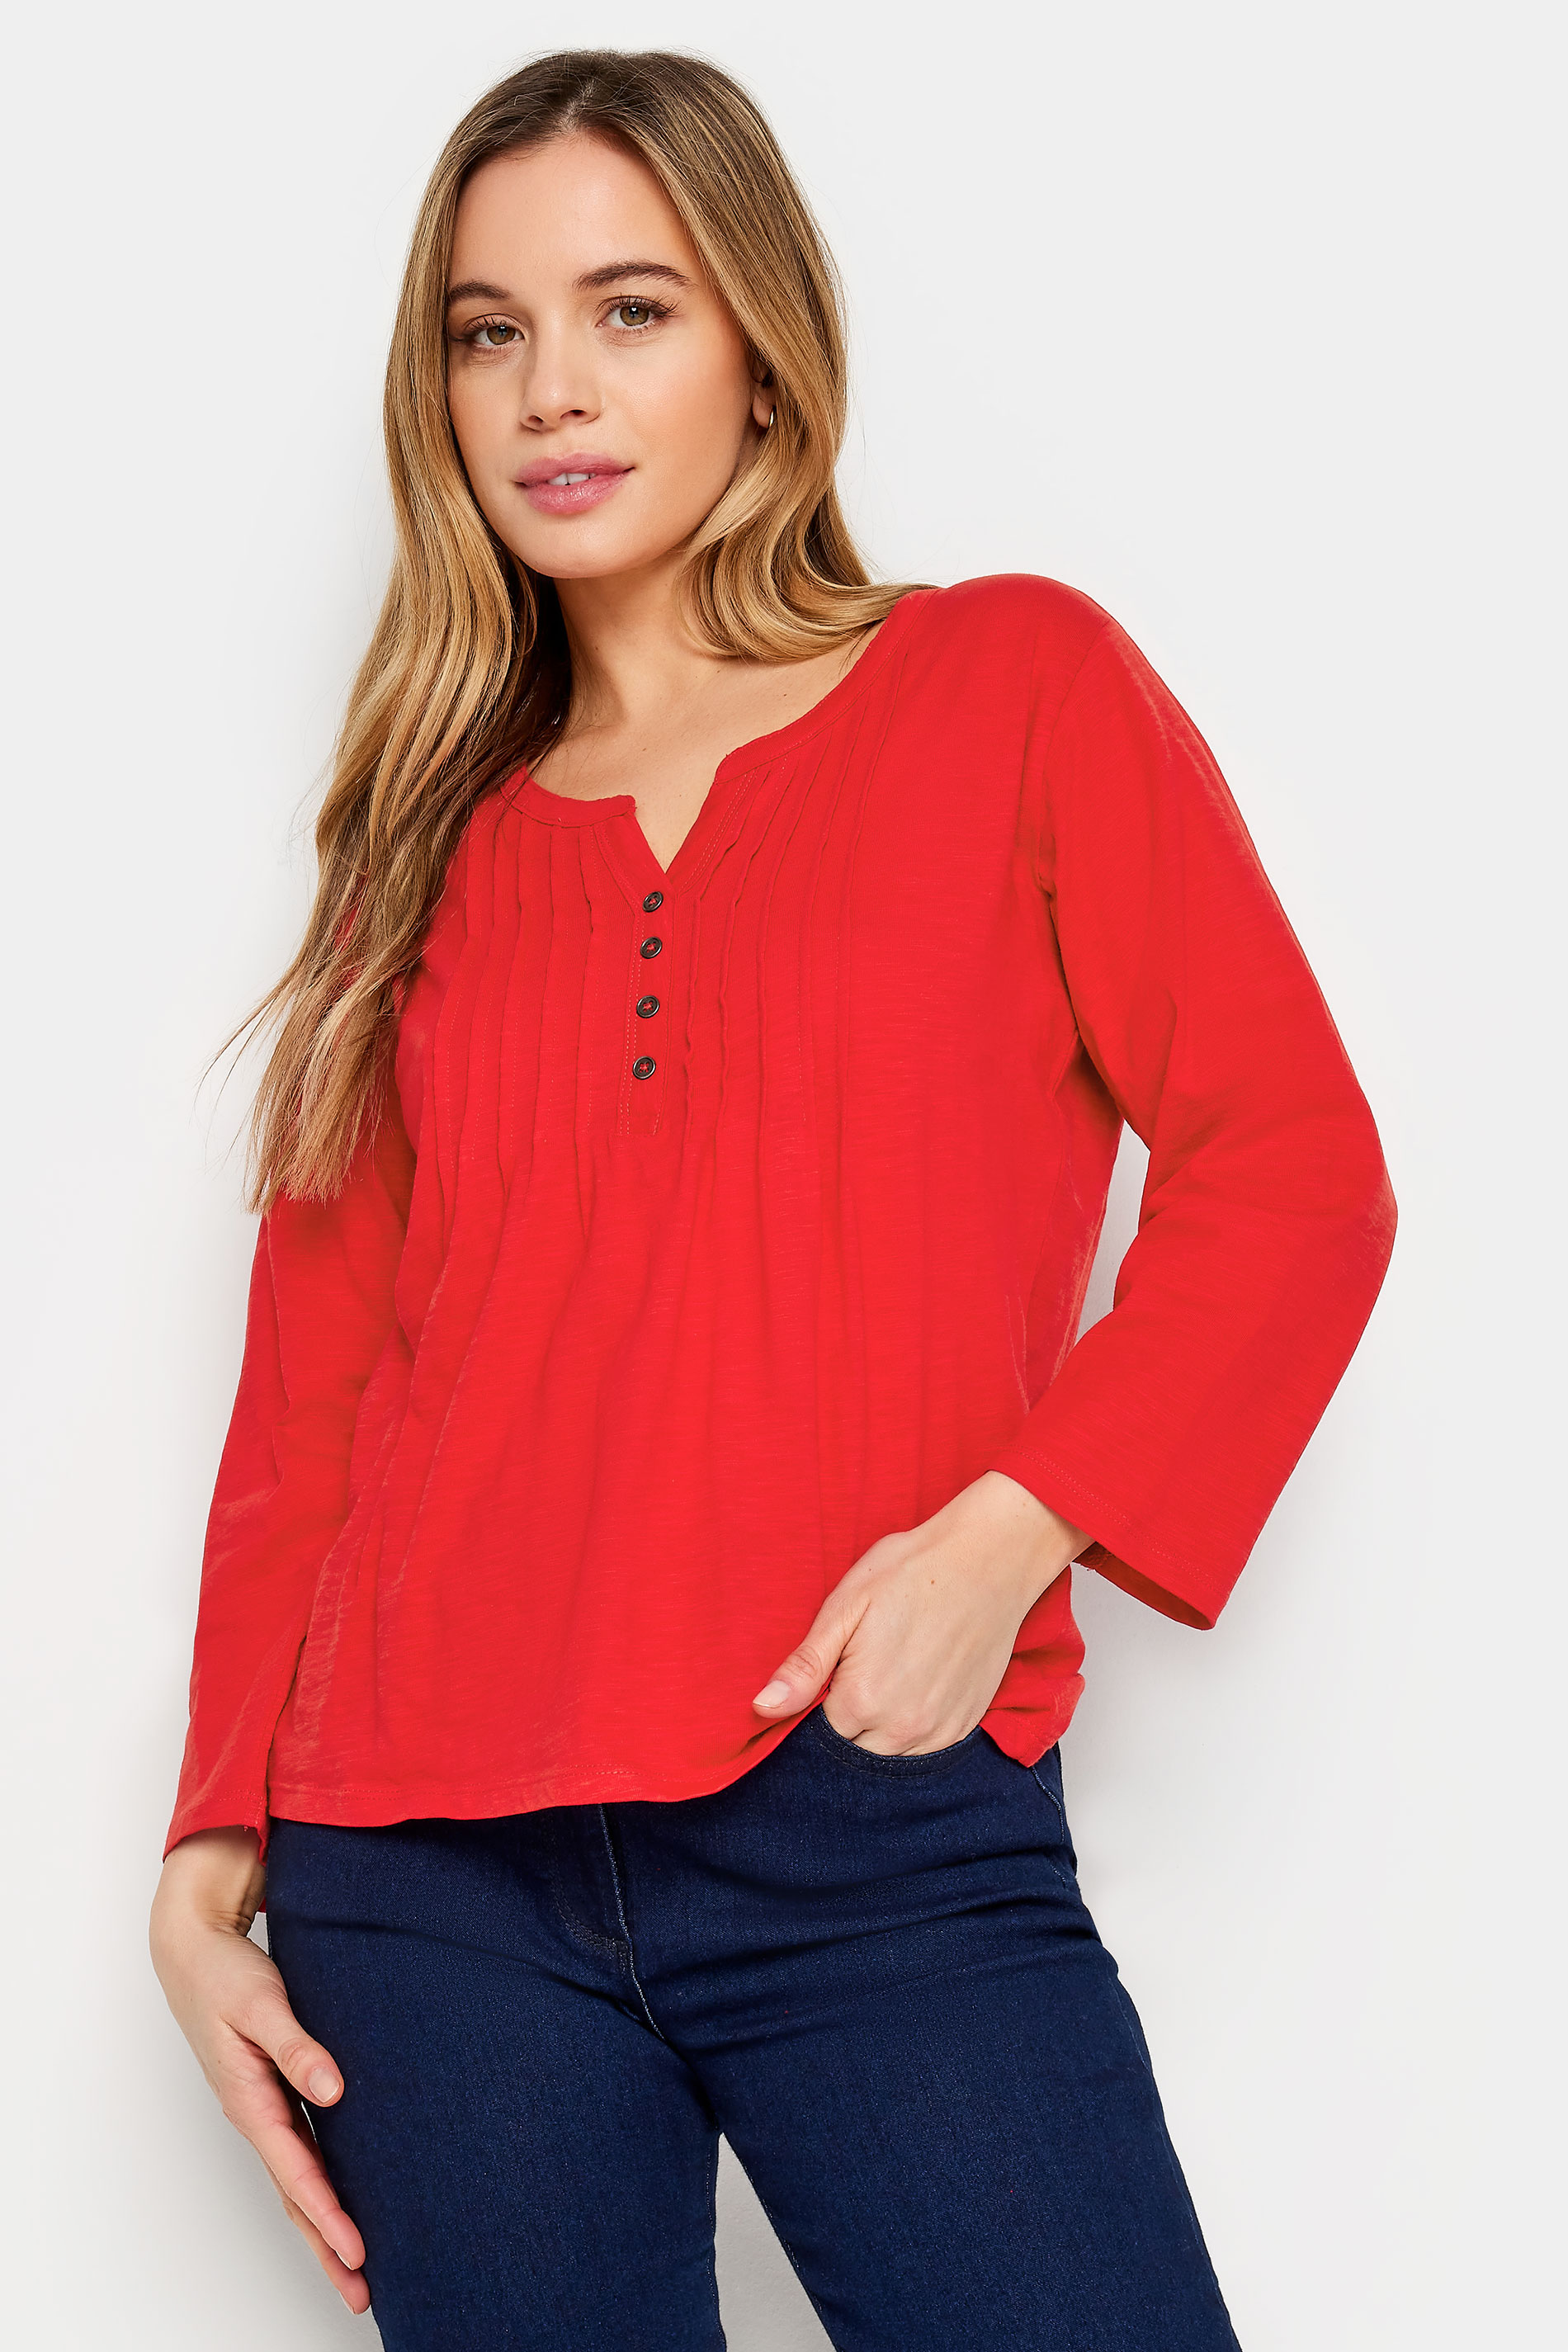 M&Co Petite Bright Red Cotton Henley Top | M&Co 1